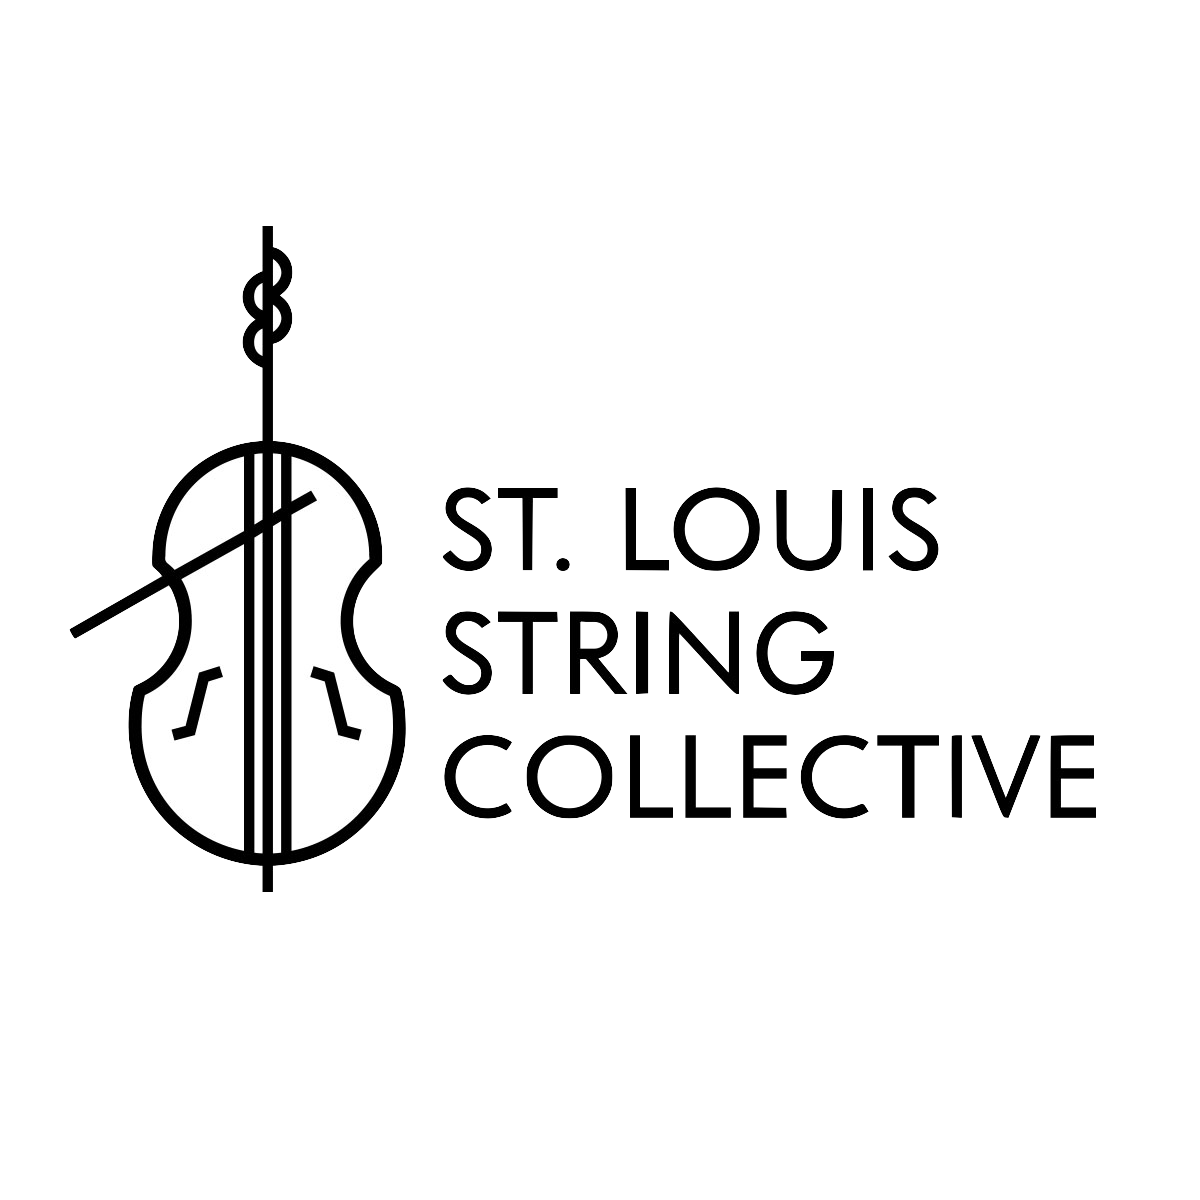 St. Louis String Collective